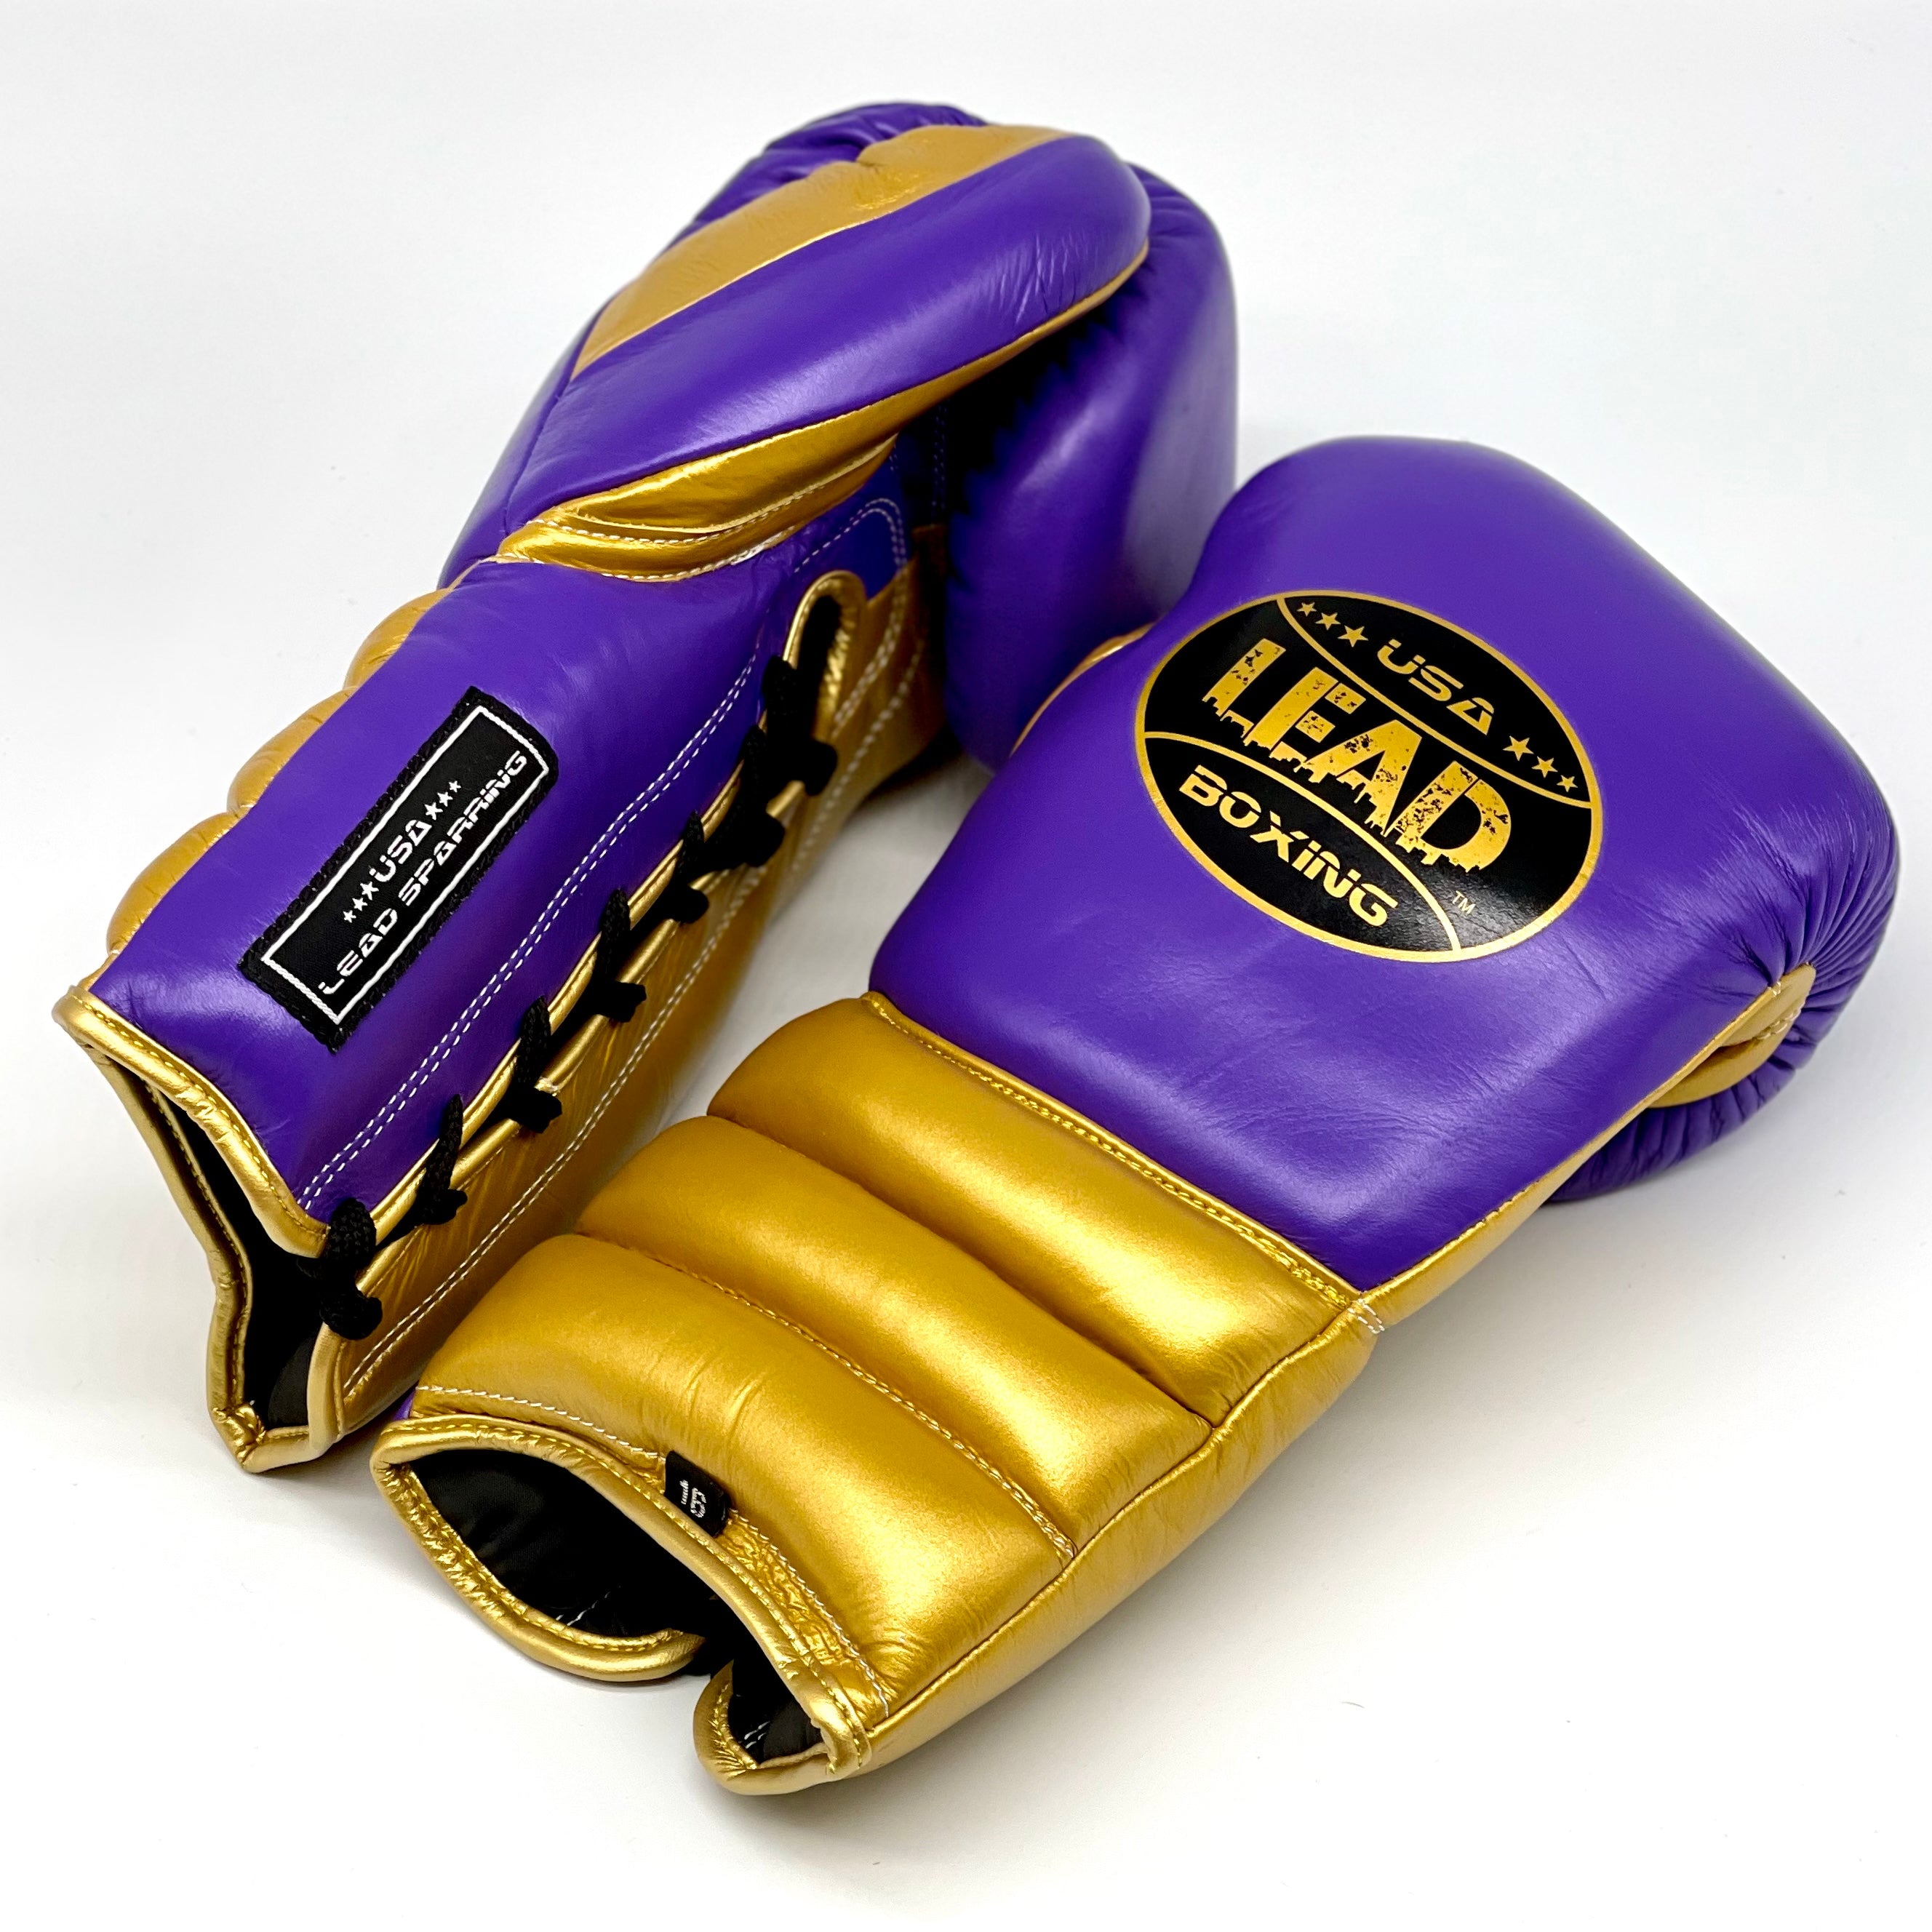 LEAD Sparring Gloves ( Purple / Gold )